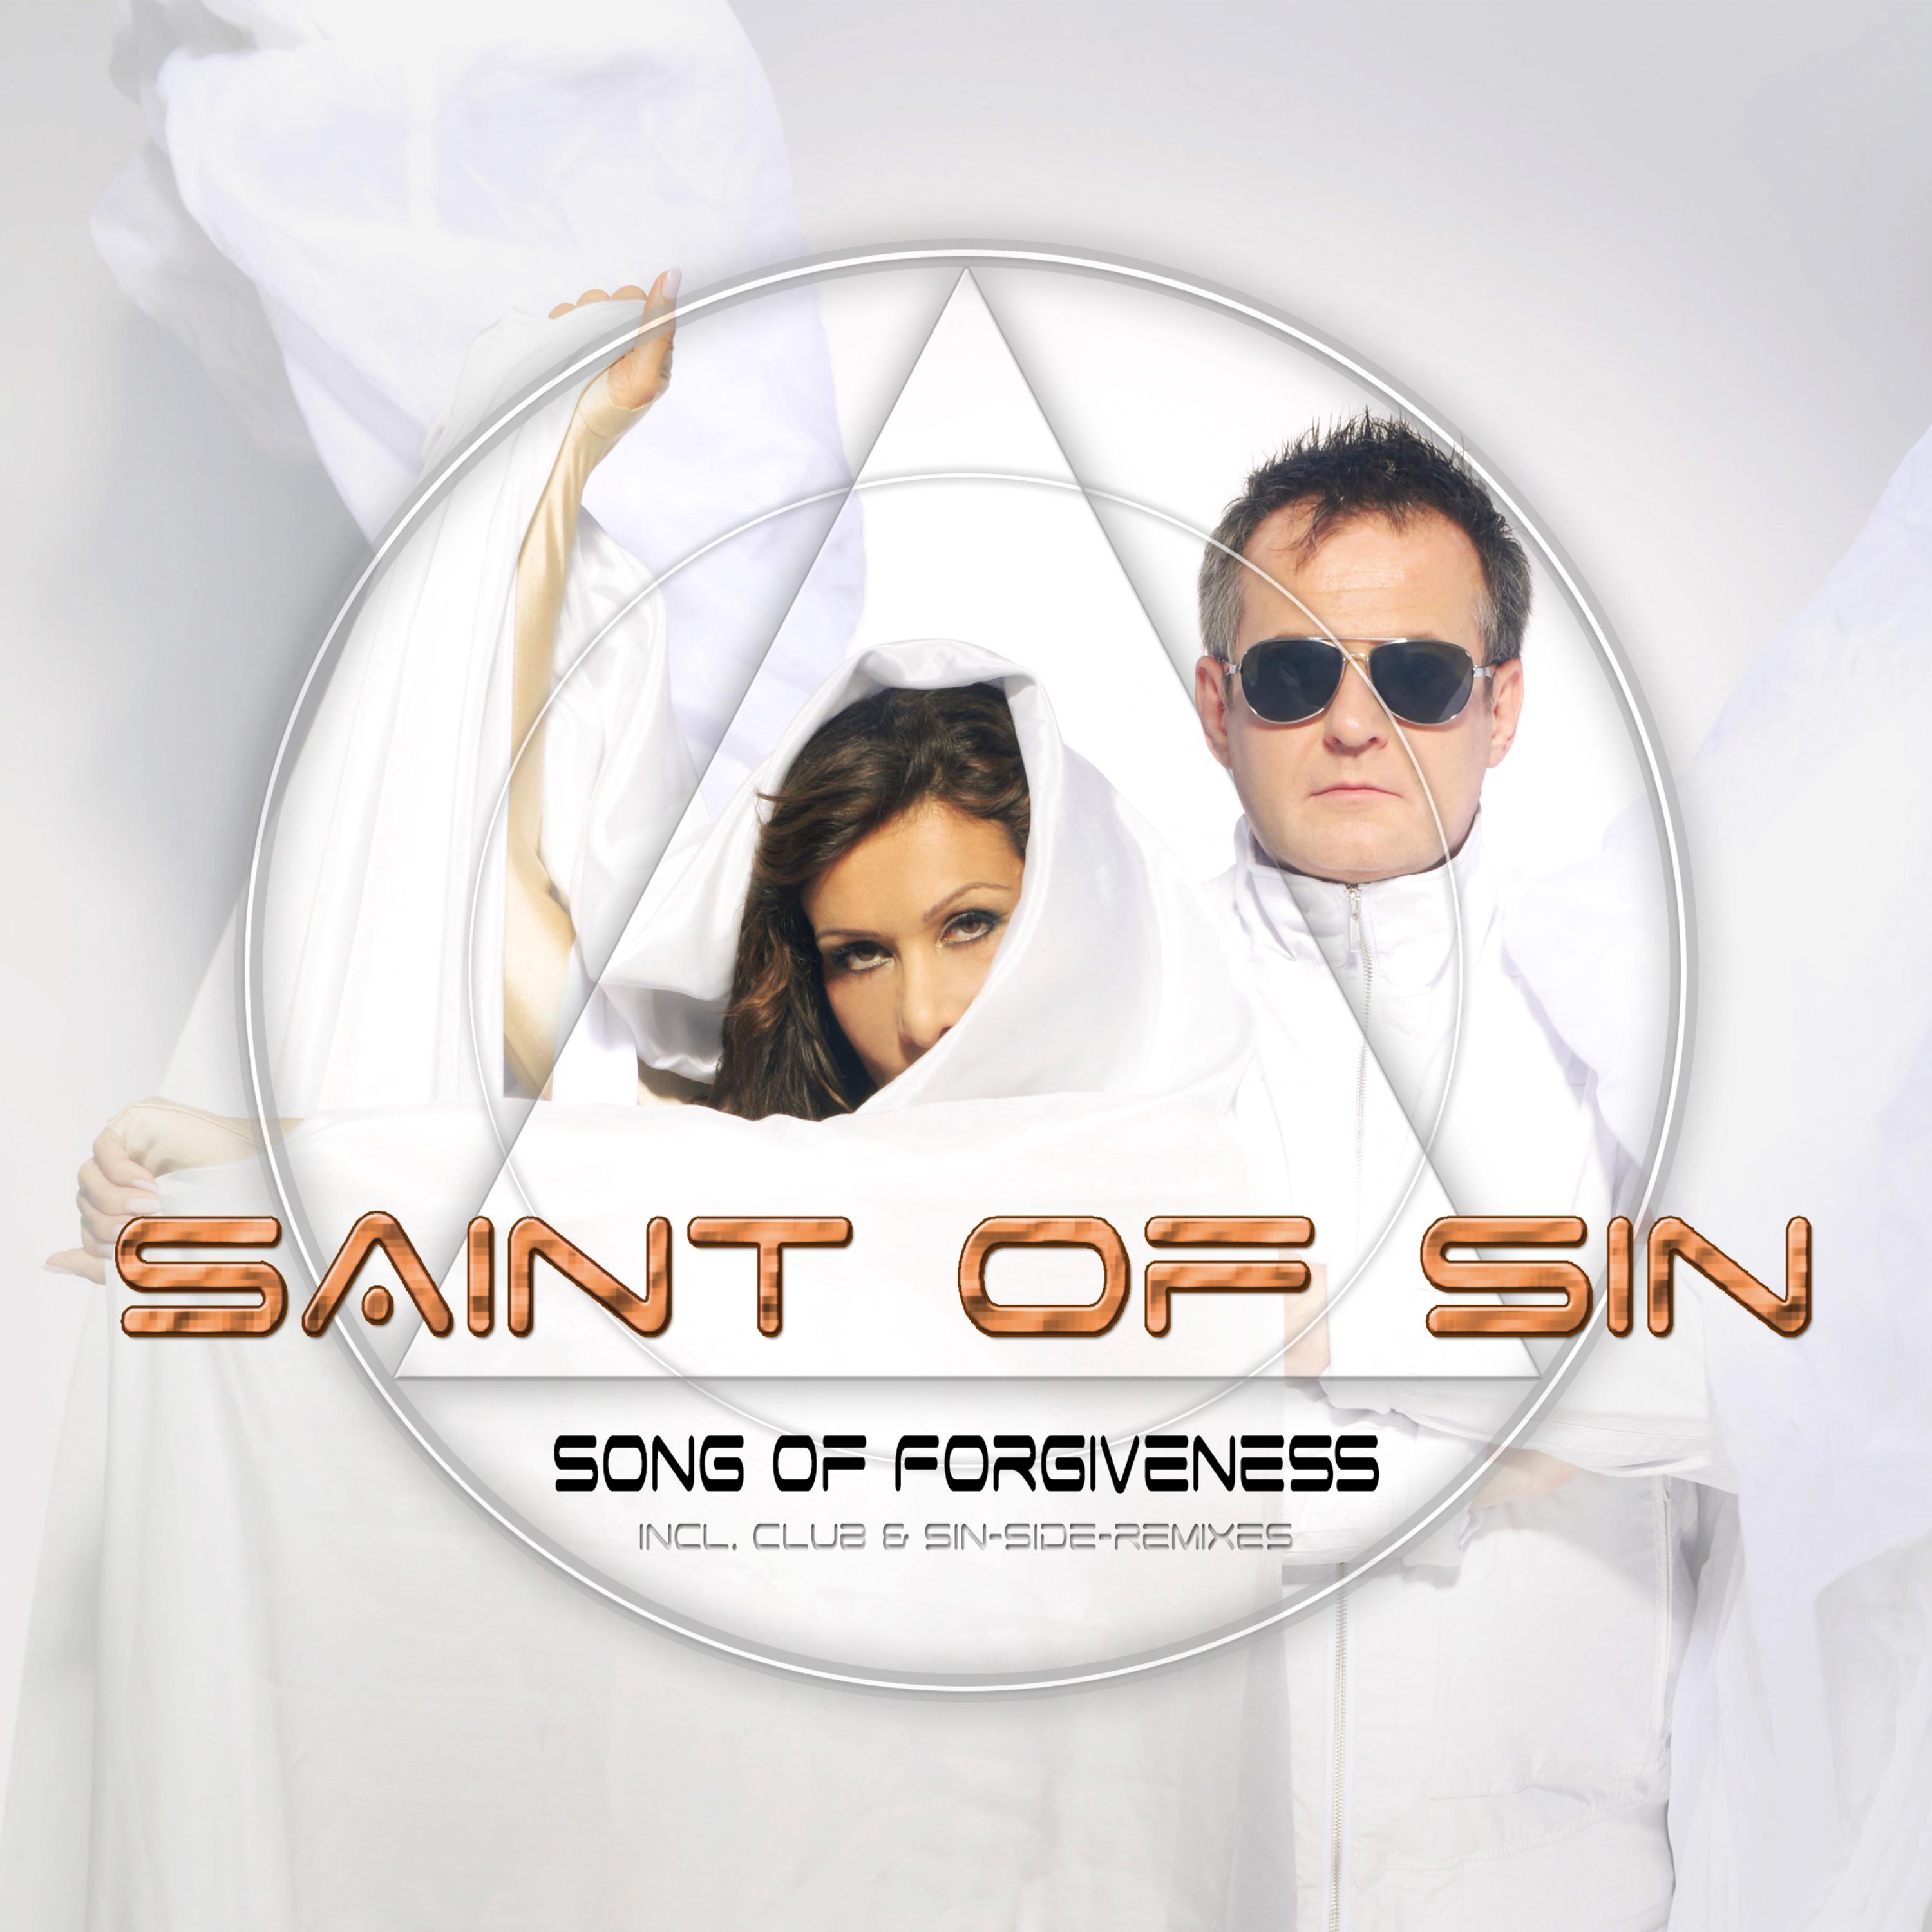 Song of Forgiveness (Sin-Side Radio Mix)